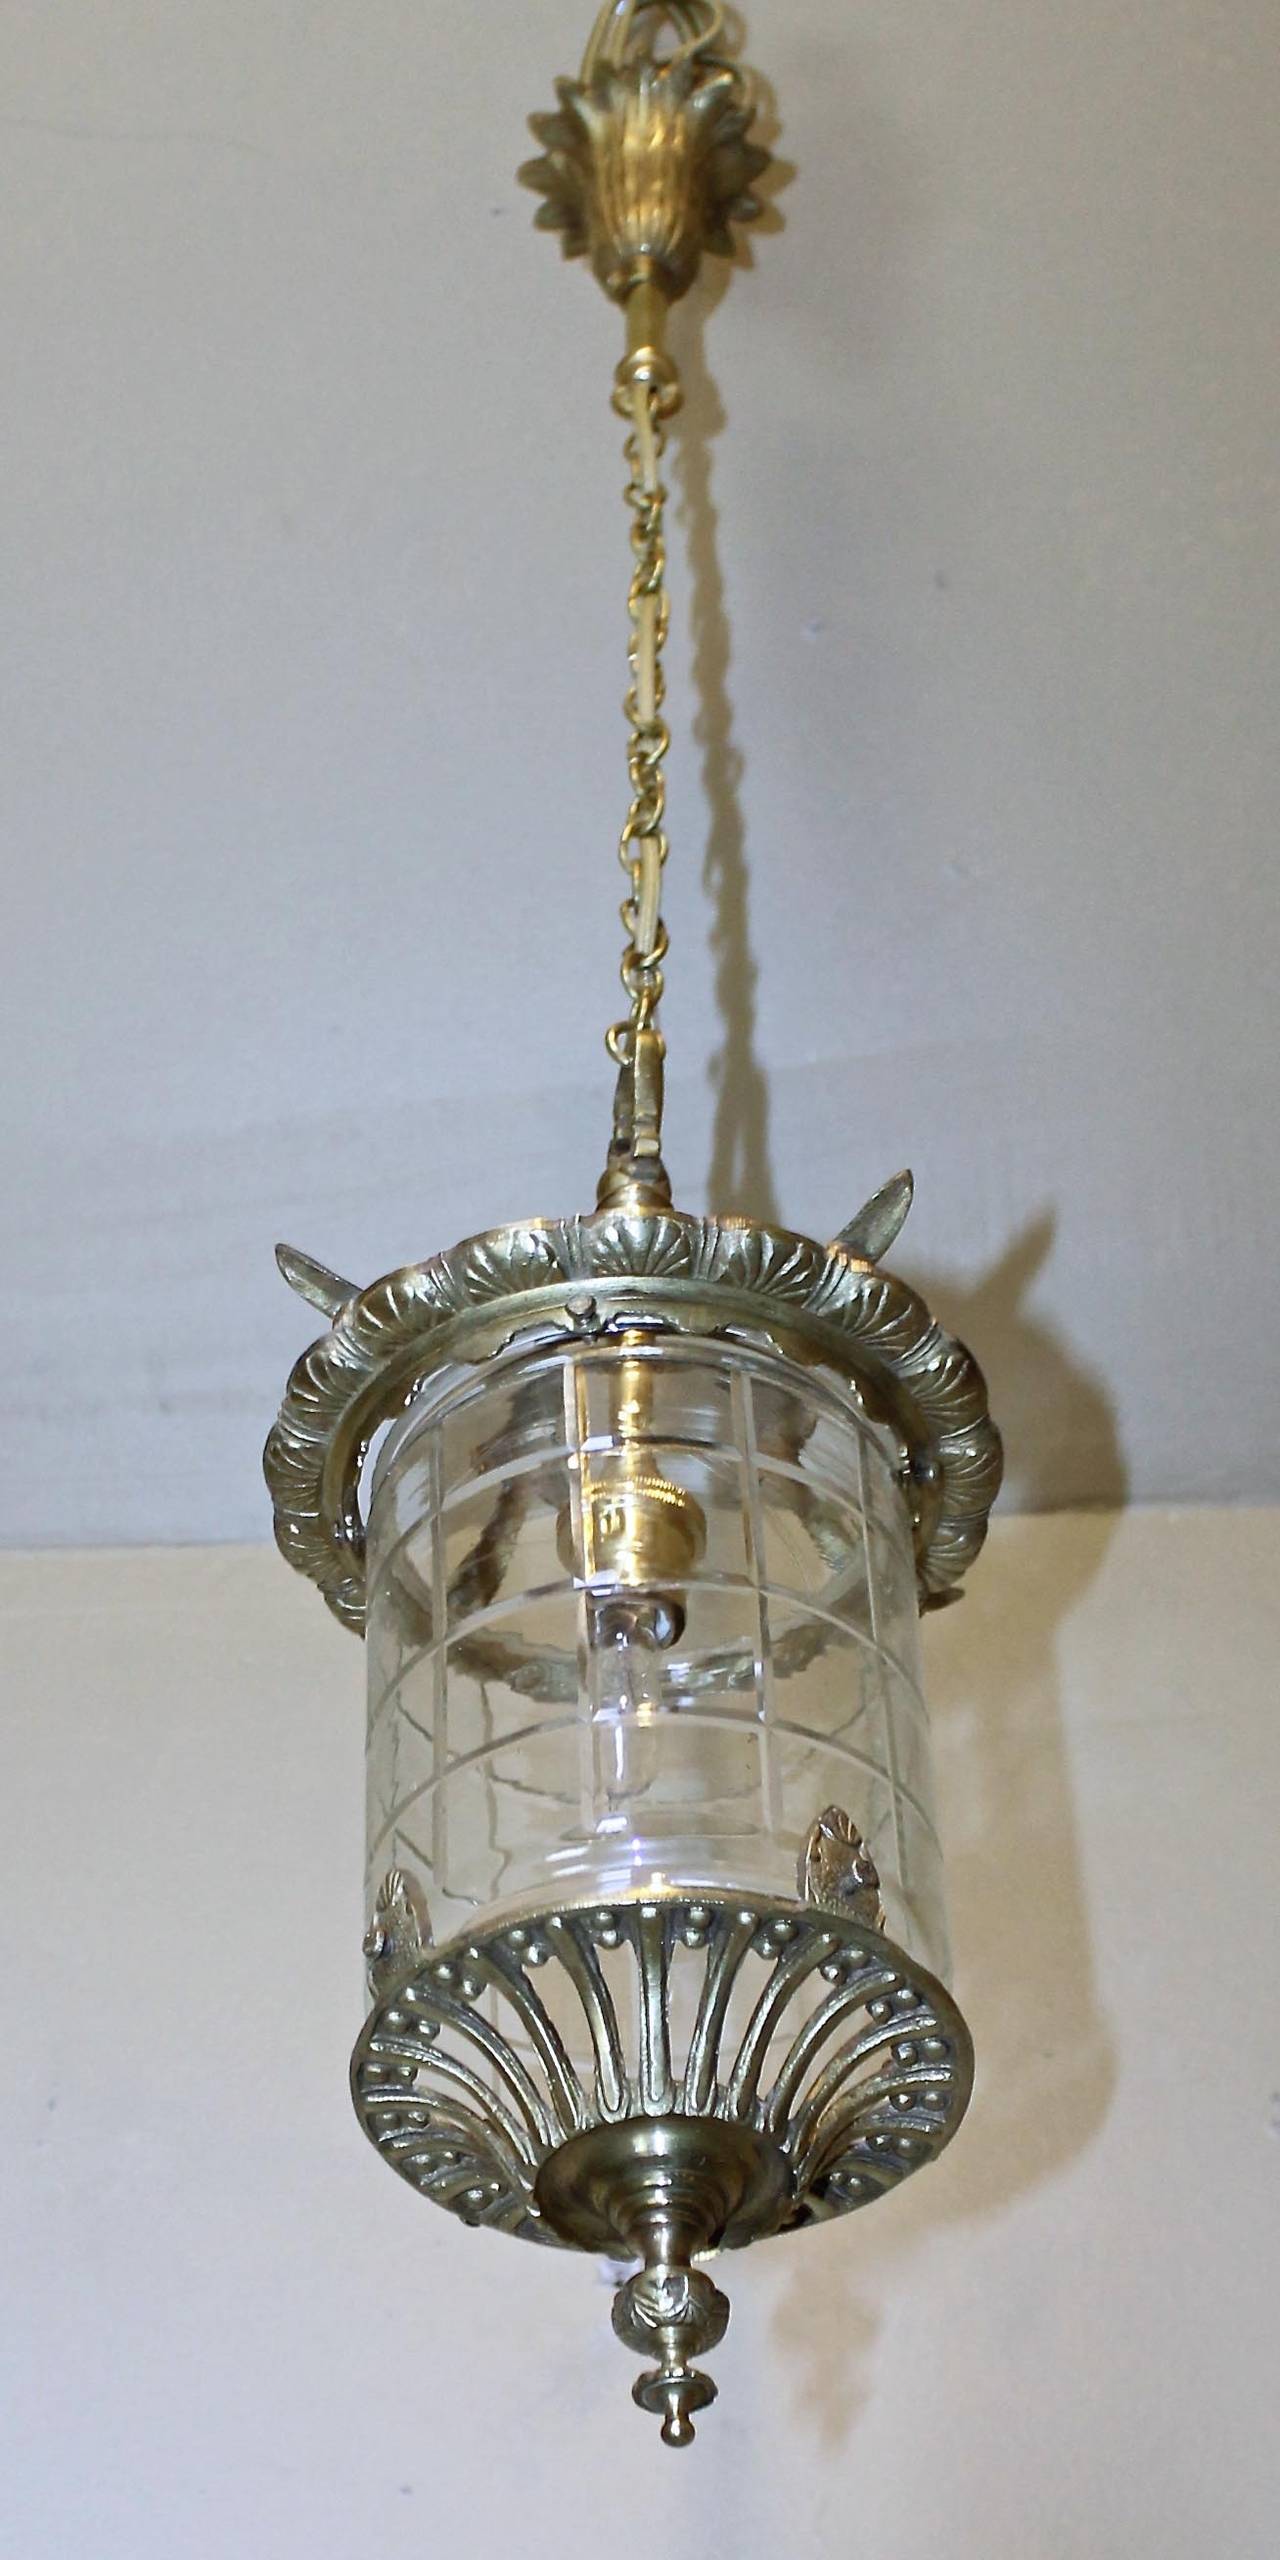 French brass handing lantern with single 40-watt candalabra size bulb inside a fitted glass dome. Very nice overall detailing to brass. Perfect for smaller hall, entry or powder bath. Overall height with chain and ceiling cap is 31